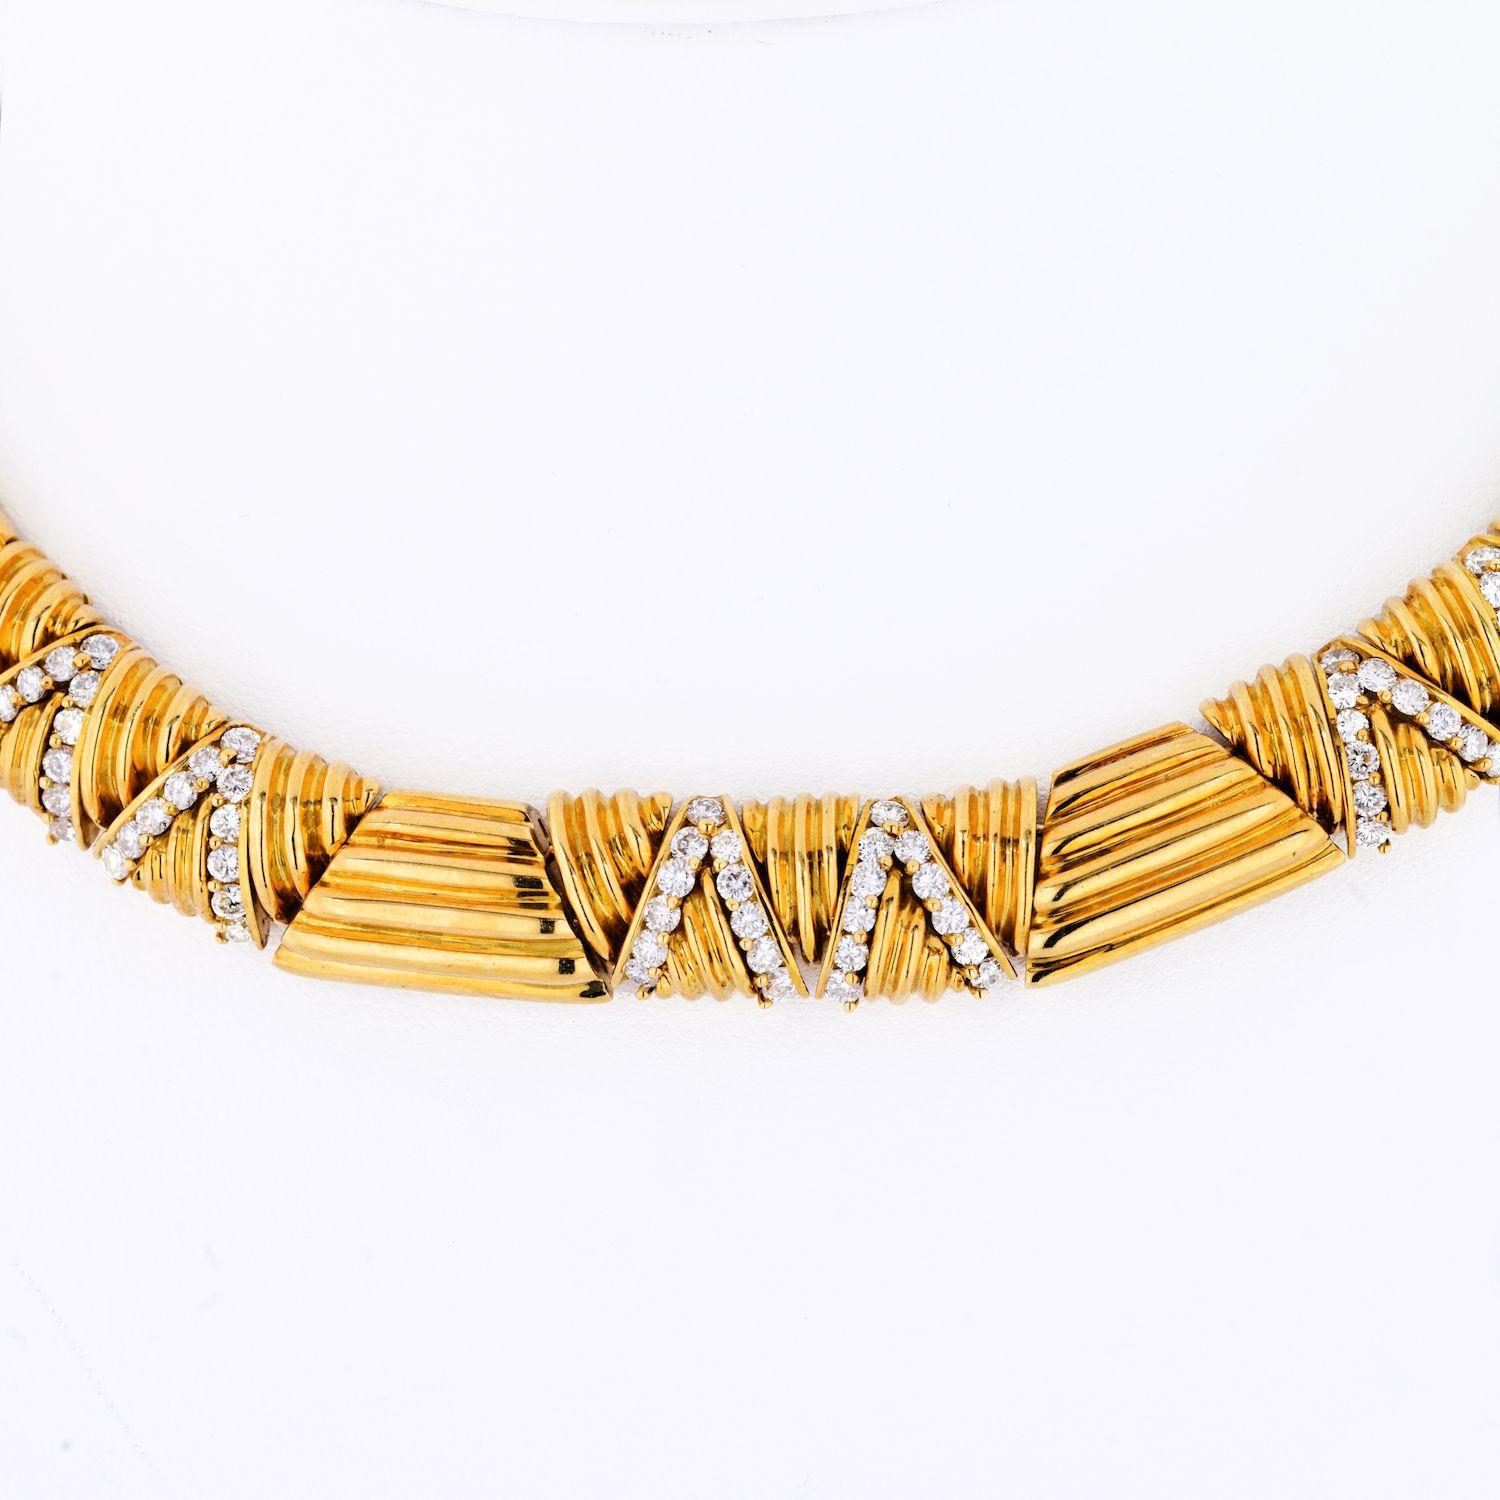 Crafted in 1980's made in 18k yellow gold this substantial rigid gold choker necklace is just lightly encrusted with round cut diamonds for a little glitz. Other than that it's a beautiful dome feel statement jewelry piece that can be worn alone or